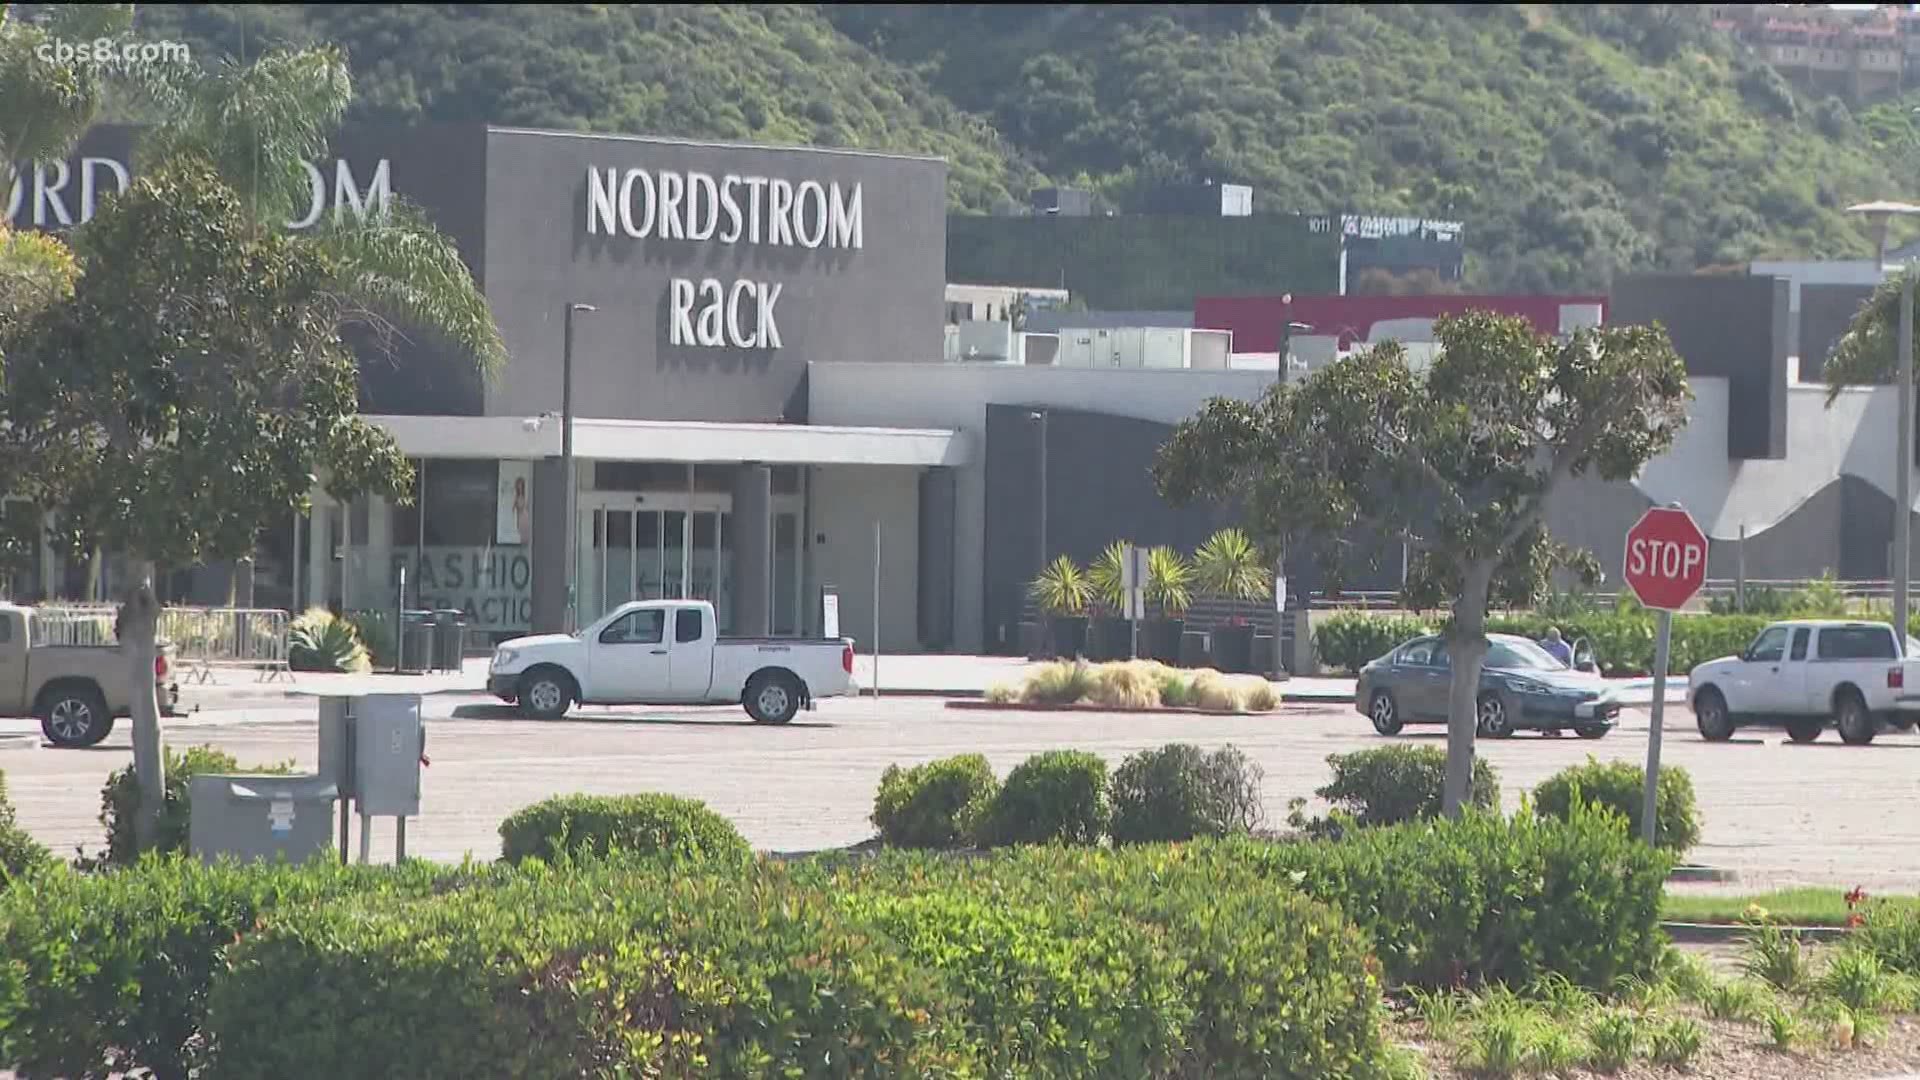 All San Diego retail business can offer curbside pickup and office buildings were given the green light to reopen Tuesday if they meet certain requirements.